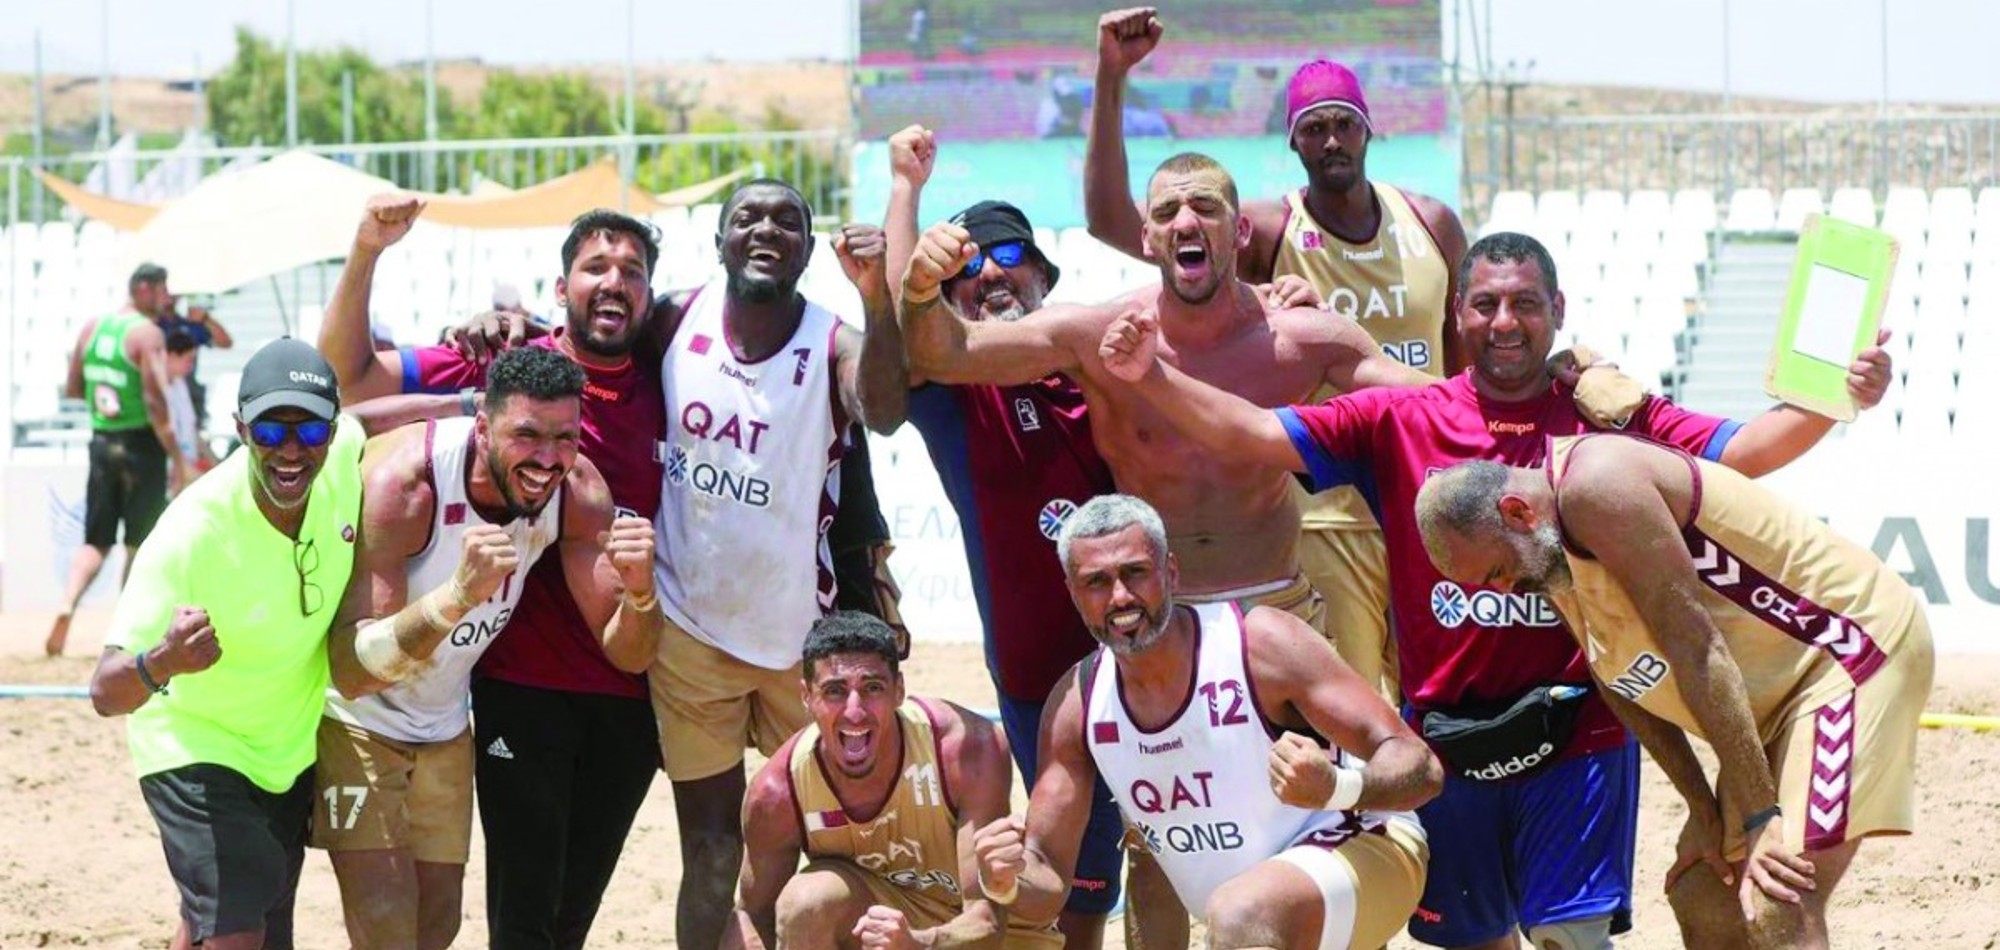 Qatar beat Uruguay in play-off to qualify for World Beach Games